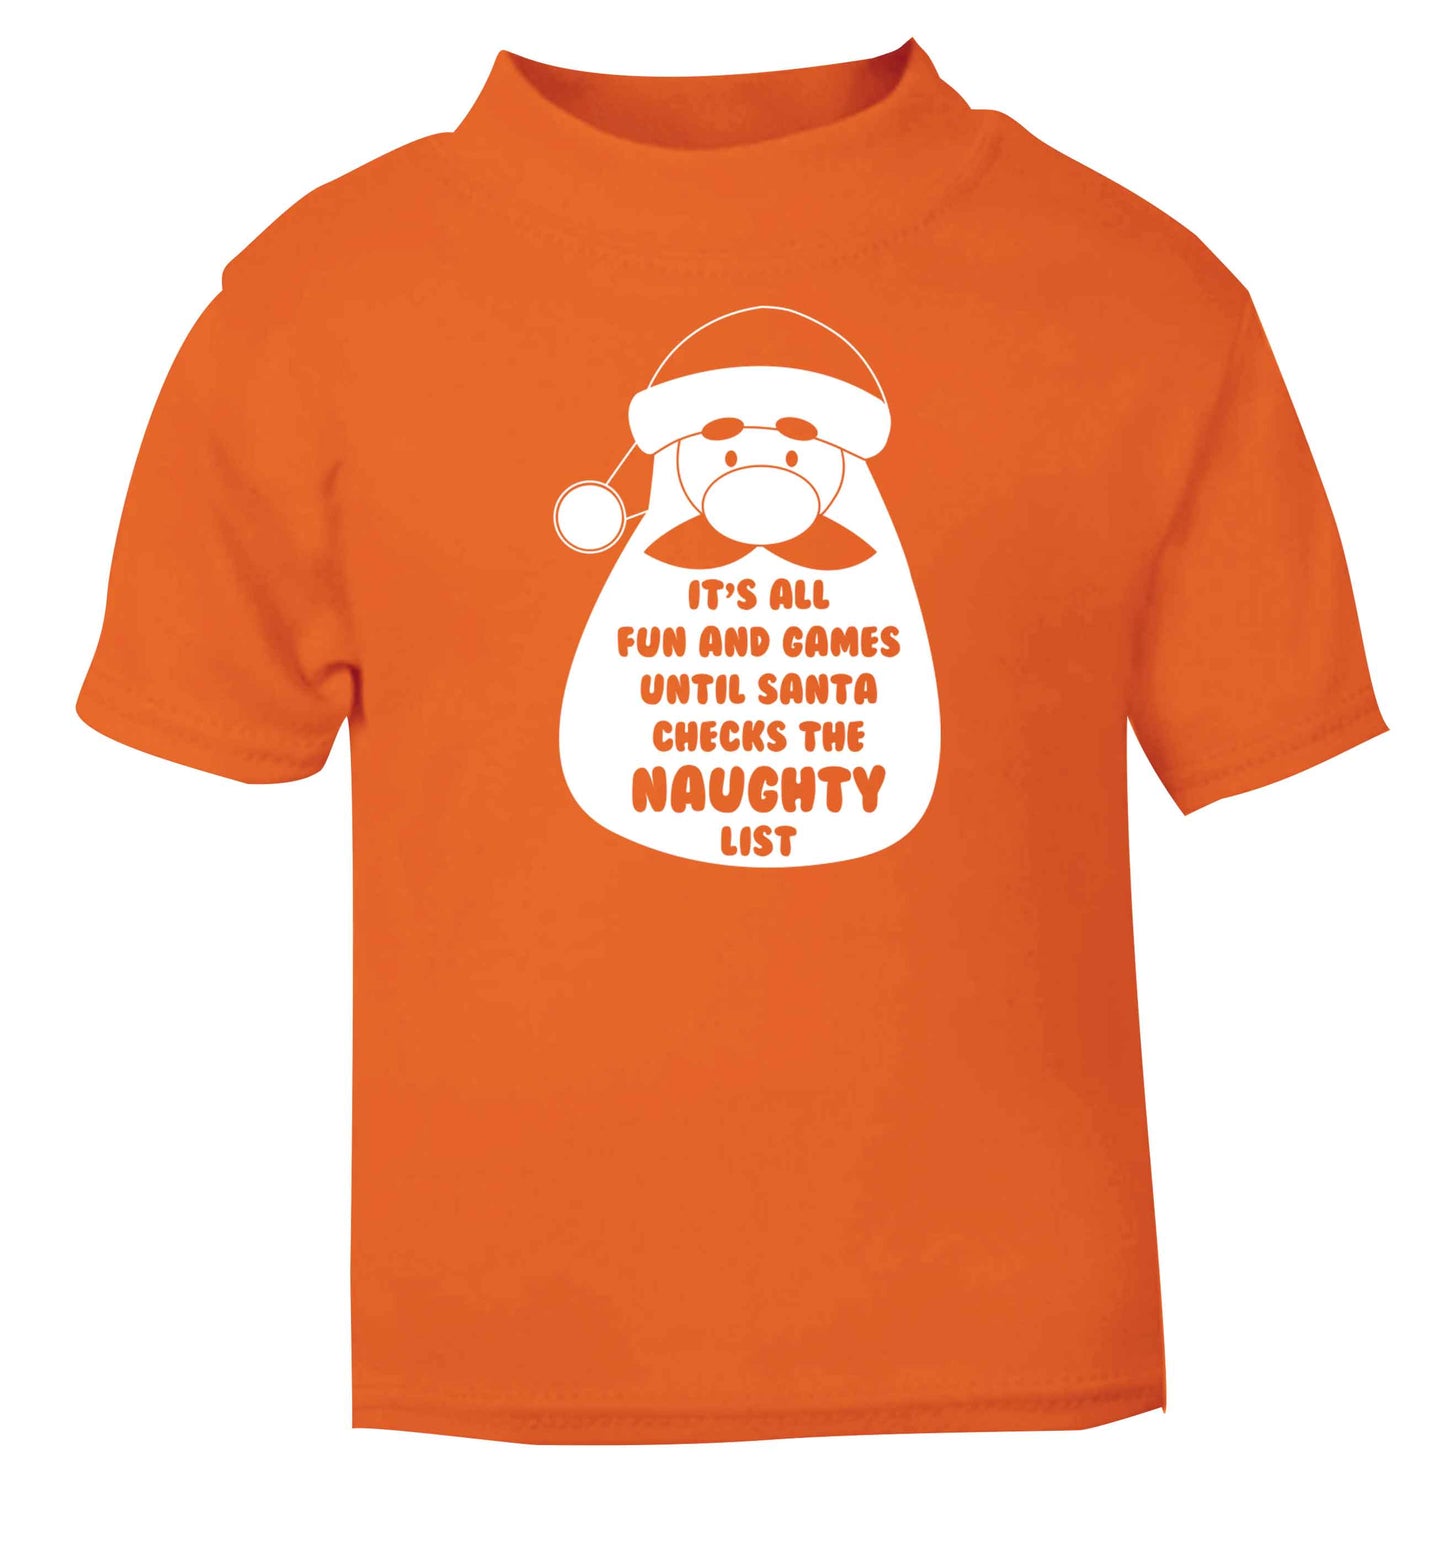 It's all fun and games until Santa checks the naughty list orange baby toddler Tshirt 2 Years